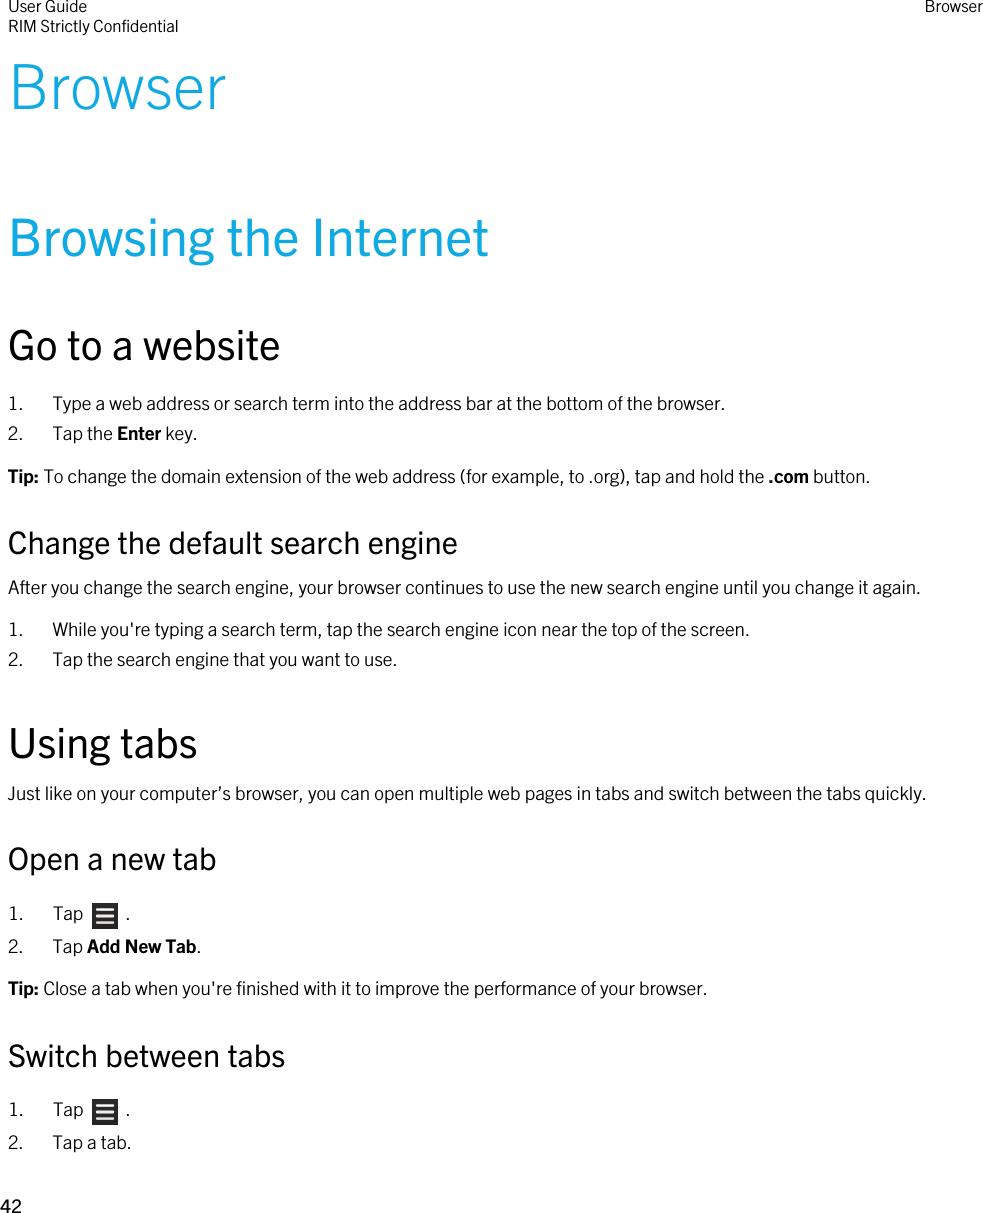 BrowserBrowsing the InternetGo to a website1. Type a web address or search term into the address bar at the bottom of the browser.2. Tap the Enter key.Tip: To change the domain extension of the web address (for example, to .org), tap and hold the .com button.Change the default search engineAfter you change the search engine, your browser continues to use the new search engine until you change it again.1. While you&apos;re typing a search term, tap the search engine icon near the top of the screen.2. Tap the search engine that you want to use.Using tabsJust like on your computer’s browser, you can open multiple web pages in tabs and switch between the tabs quickly.Open a new tab1.  Tap    .2. Tap Add New Tab.Tip: Close a tab when you&apos;re finished with it to improve the performance of your browser.Switch between tabs1.  Tap    .2. Tap a tab.User GuideRIM Strictly ConfidentialBrowser42 